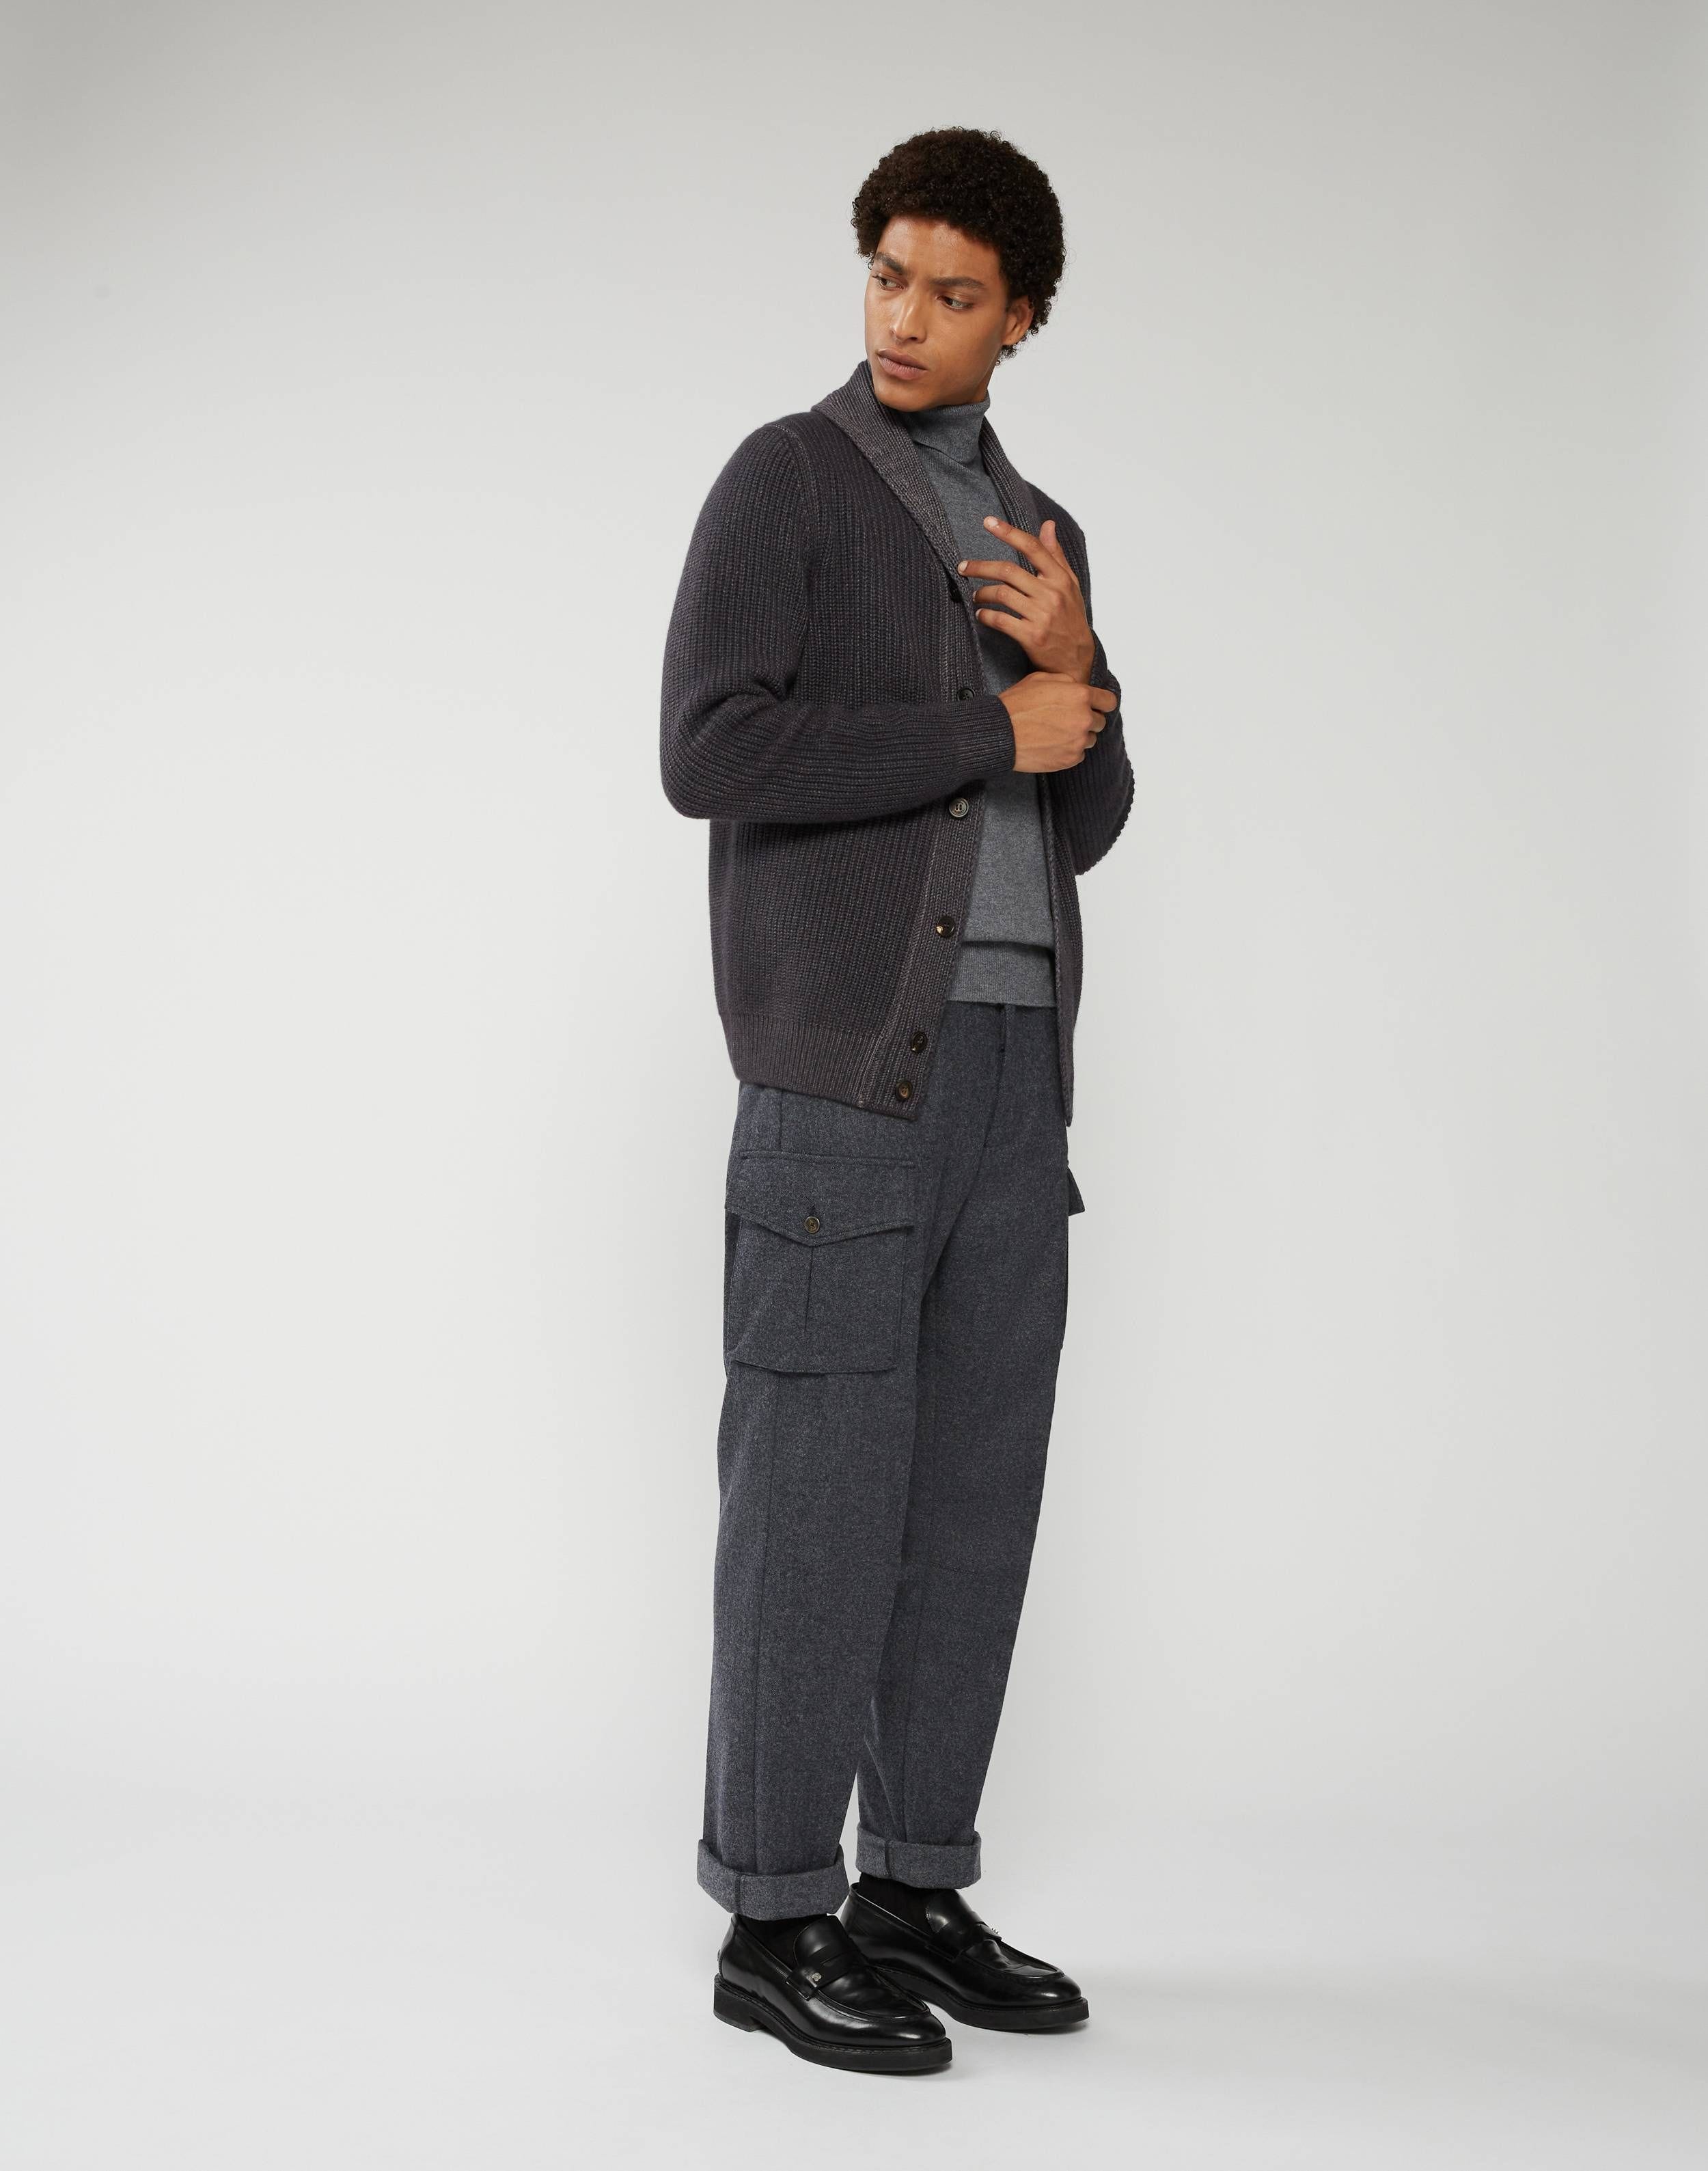 Cargo pants in grey carded flannel